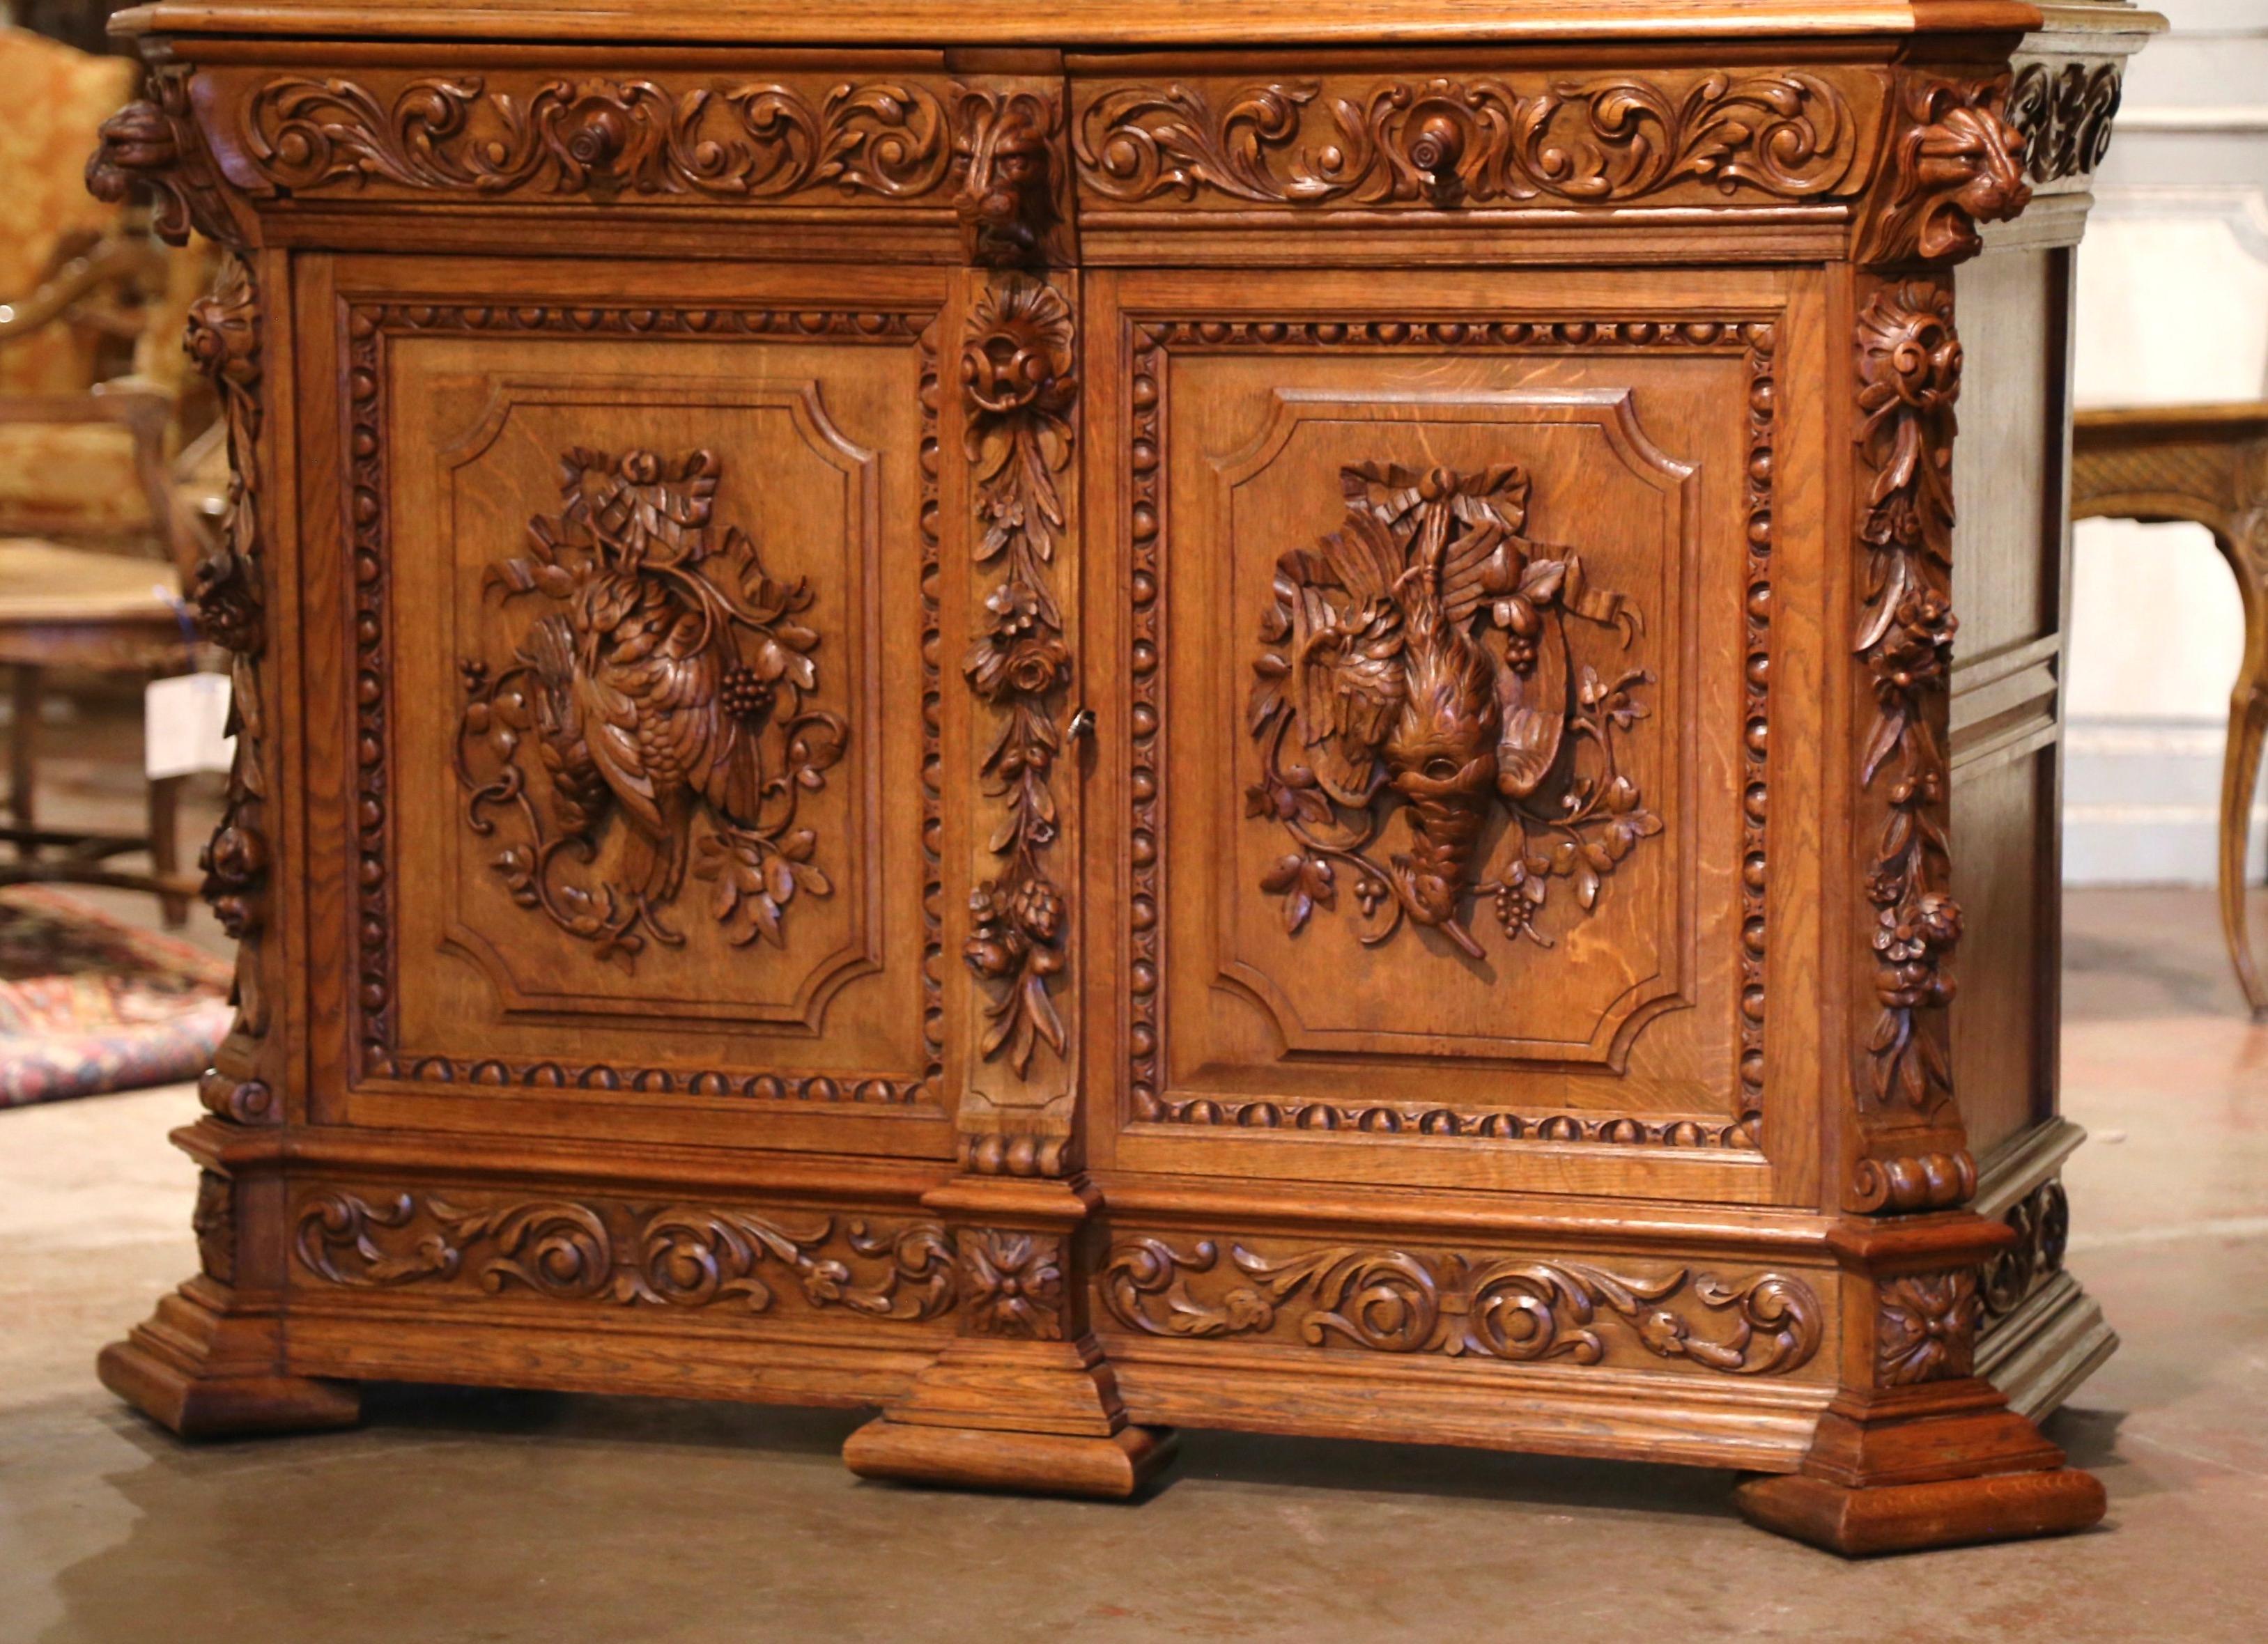 Hand-Carved 19th Century French Carved Oak Hunt Buffet Server with Grape and Vine Motifs